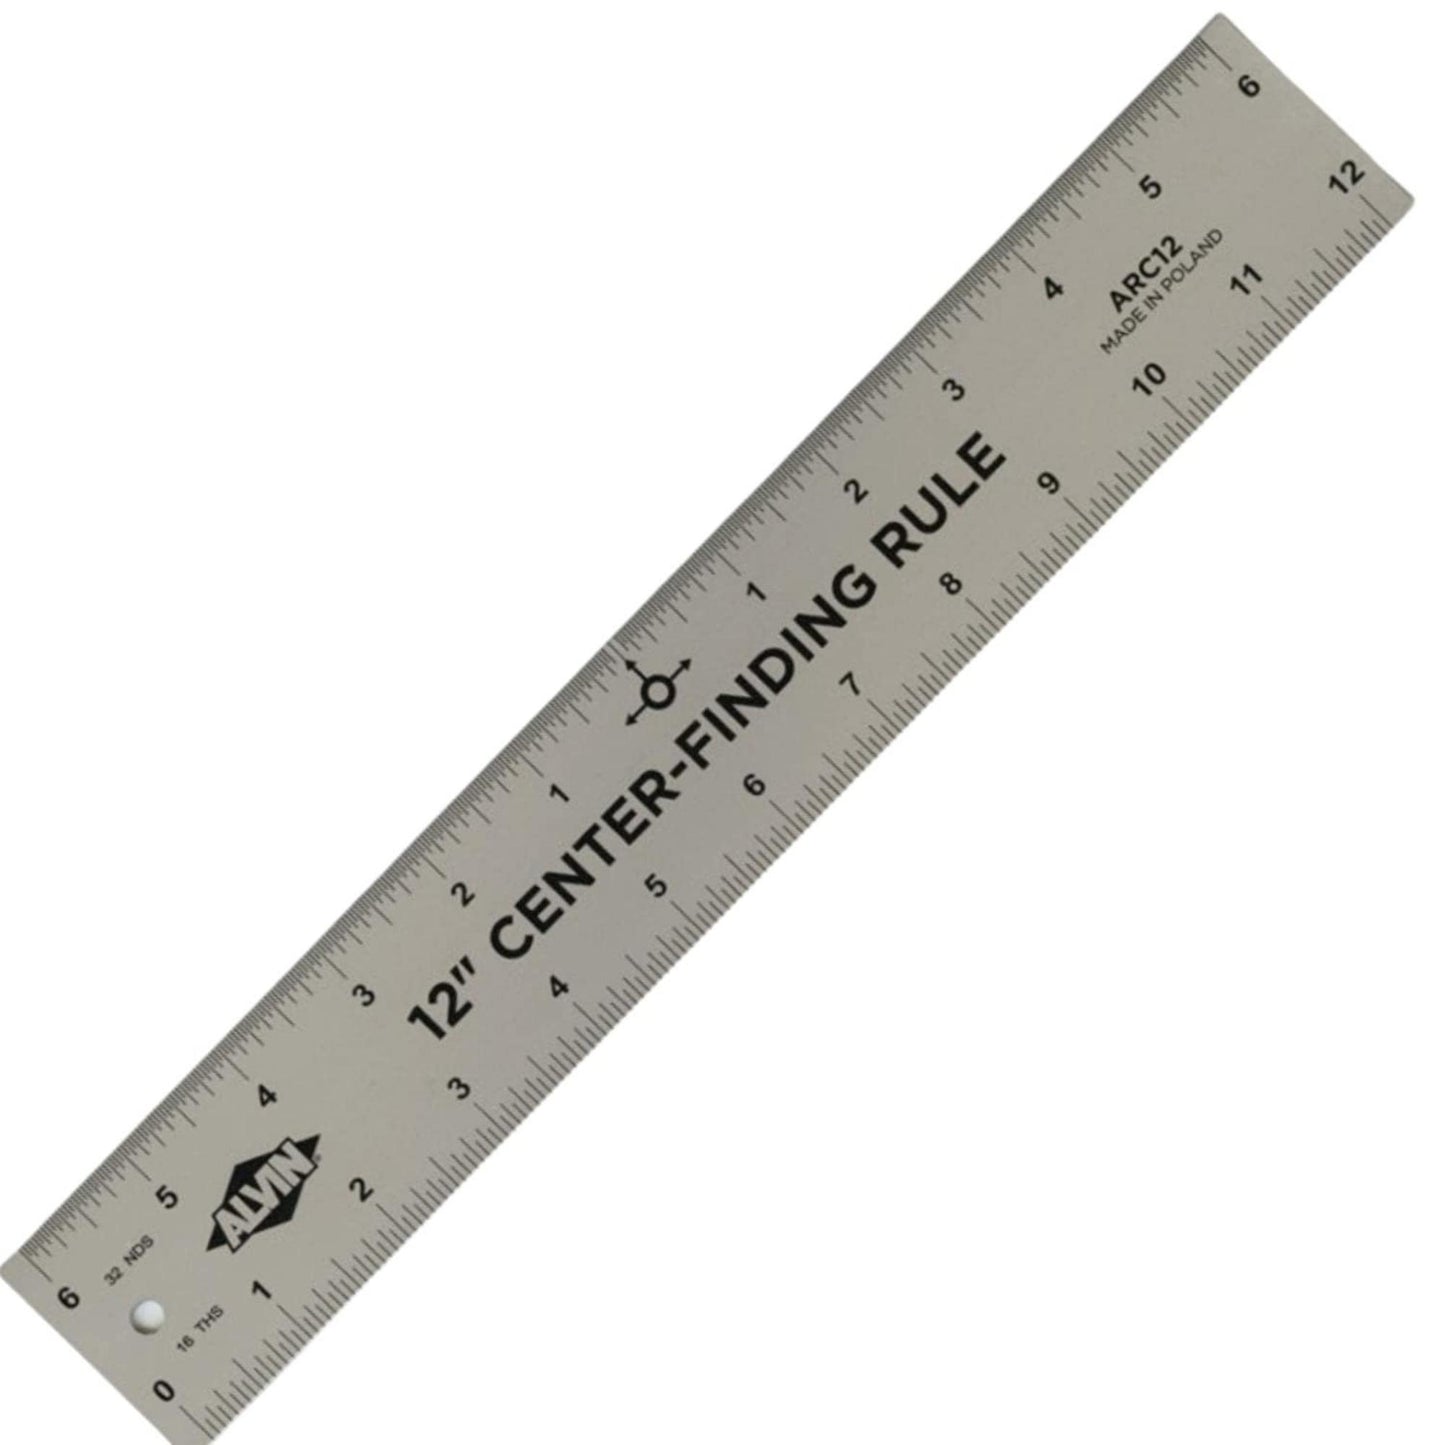 Centering Rulers